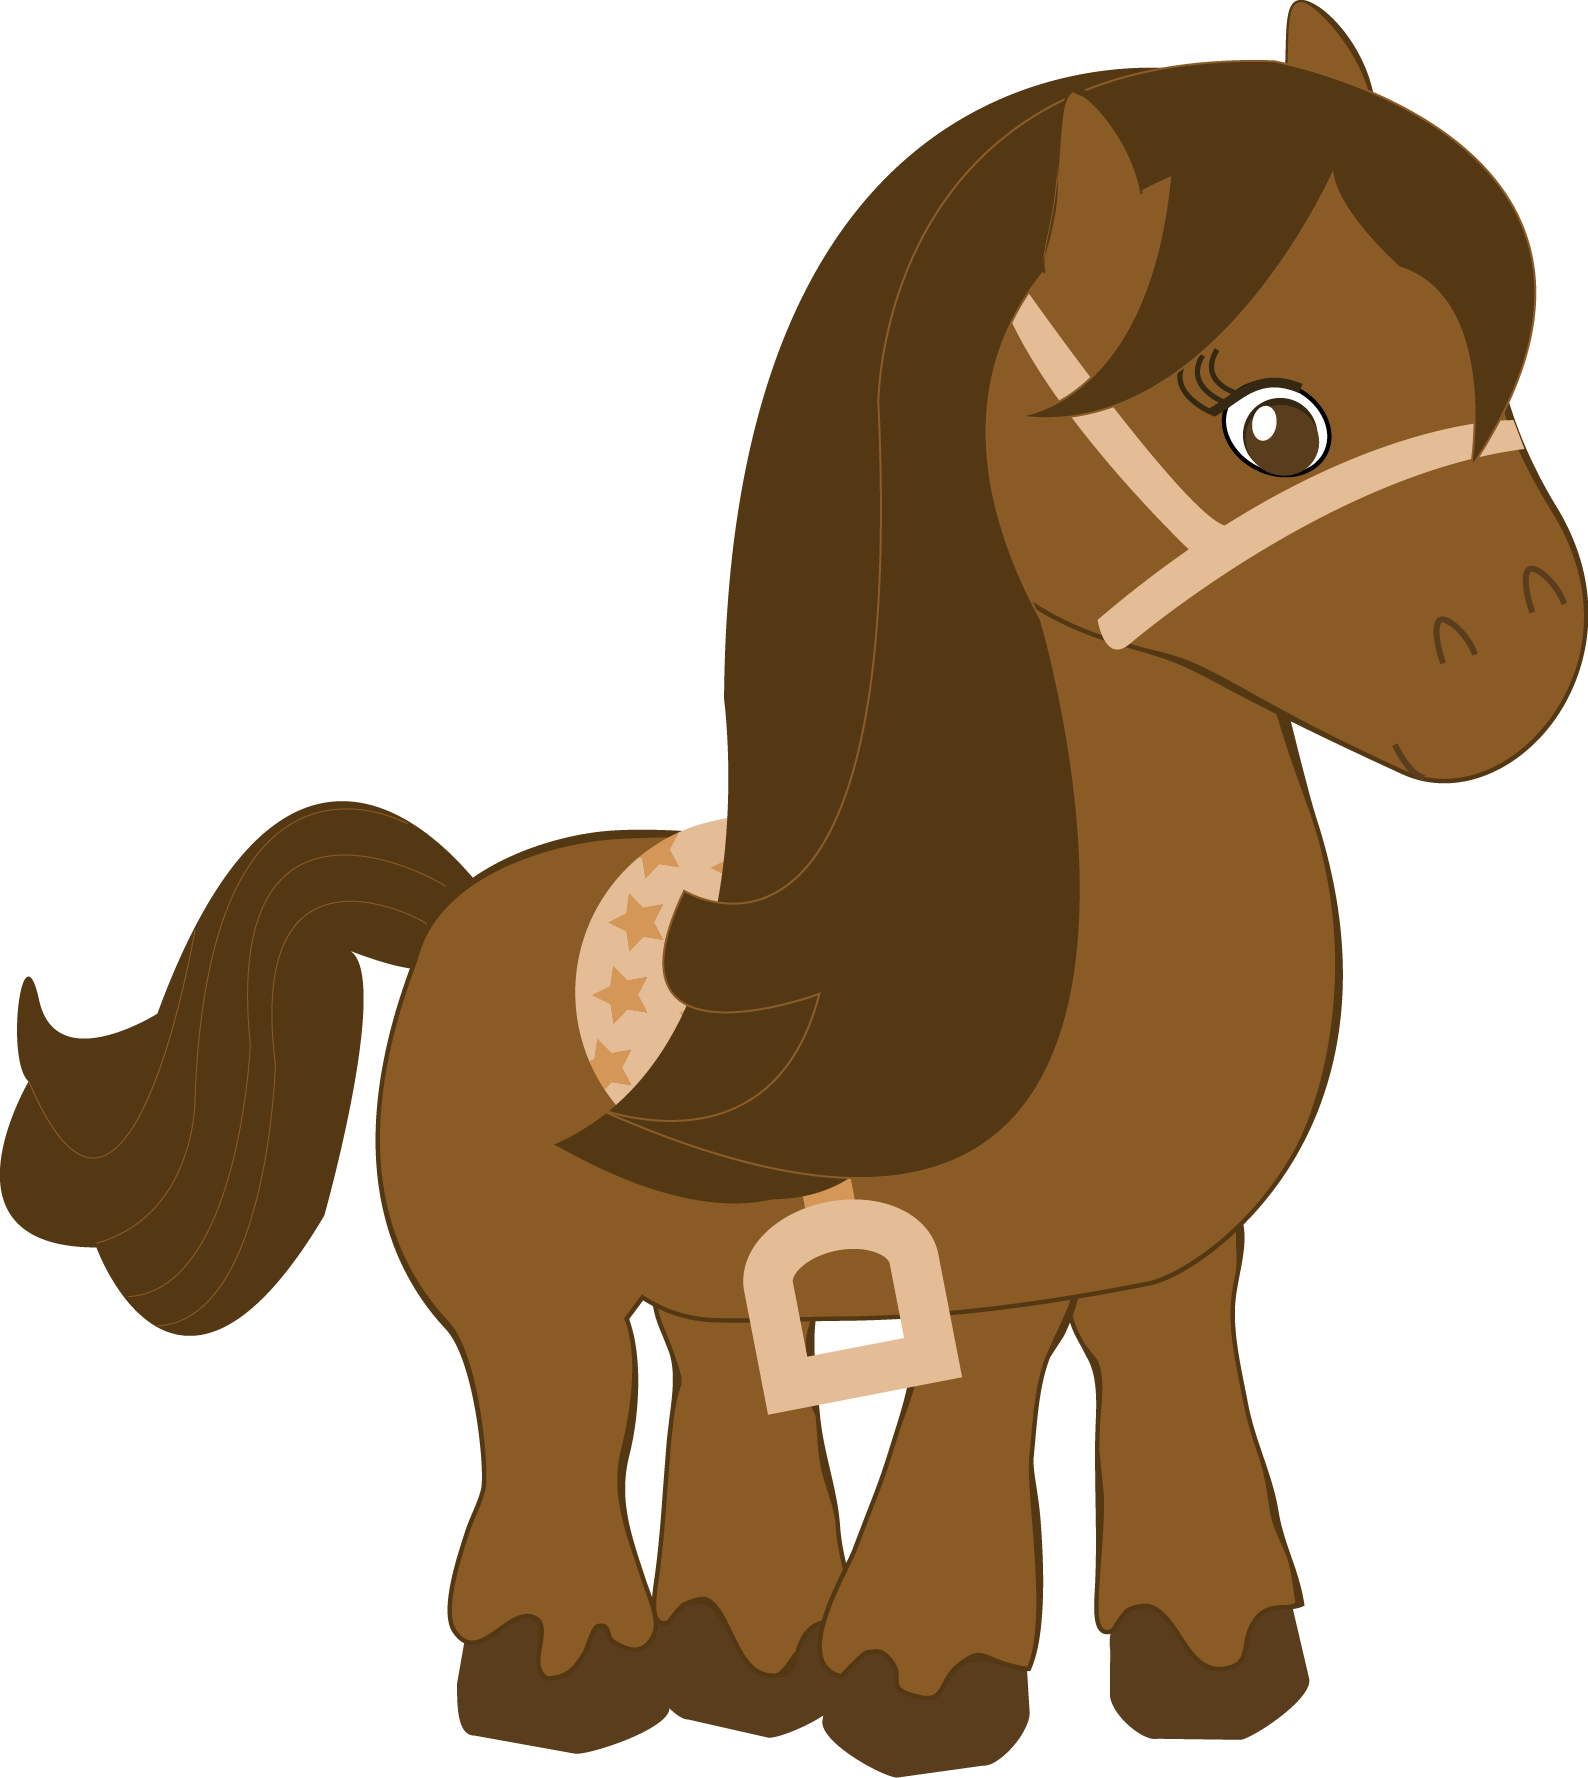 Ibbaeyuqmf px png gifts. Flower clipart horse